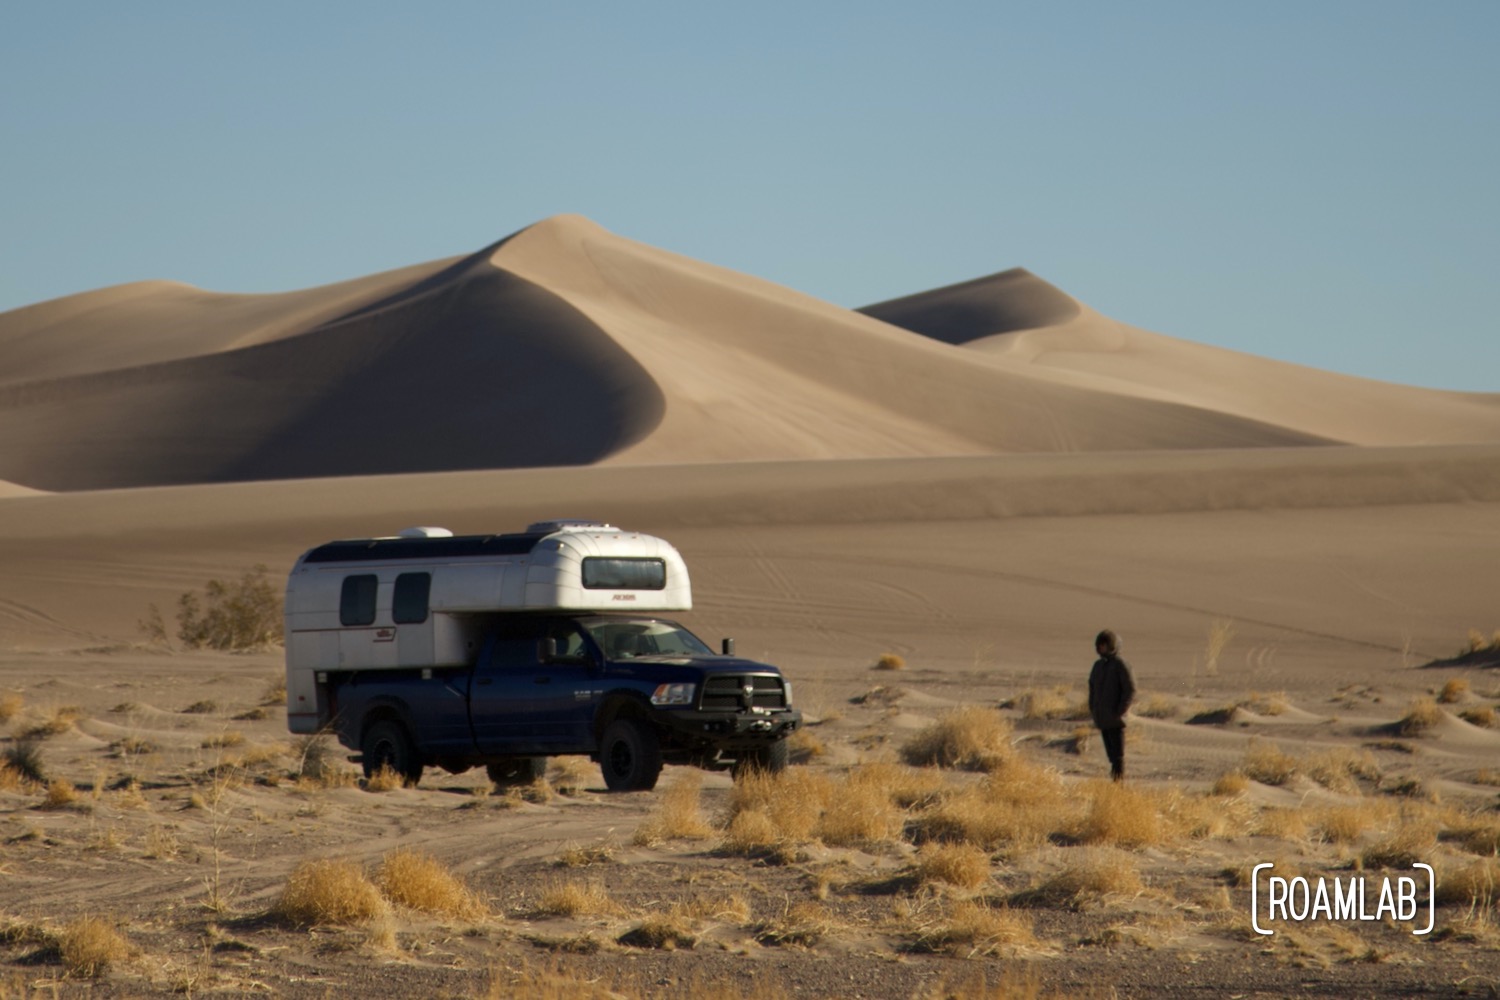 Man walking around a 1970 Avion C11 truck camper parked in the sand in front of the dunes of Big Dune Recreational Area.